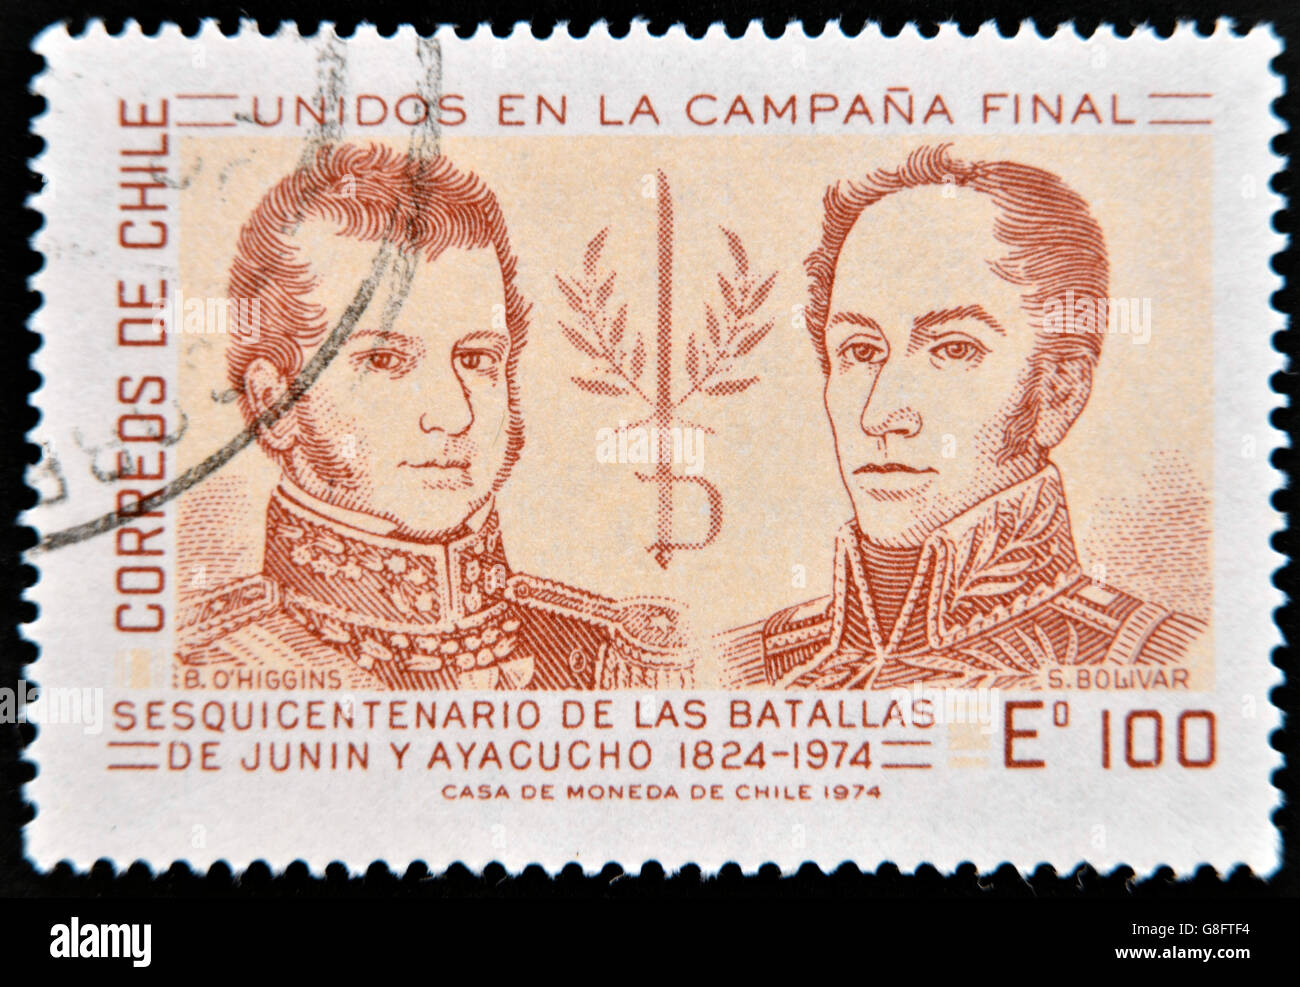 CHILE - CIRCA 1974: A stamp printed in Chile dedicated to sesquicentennial of the battle of Junin and Ayacucho, shows Simon Boli Stock Photo